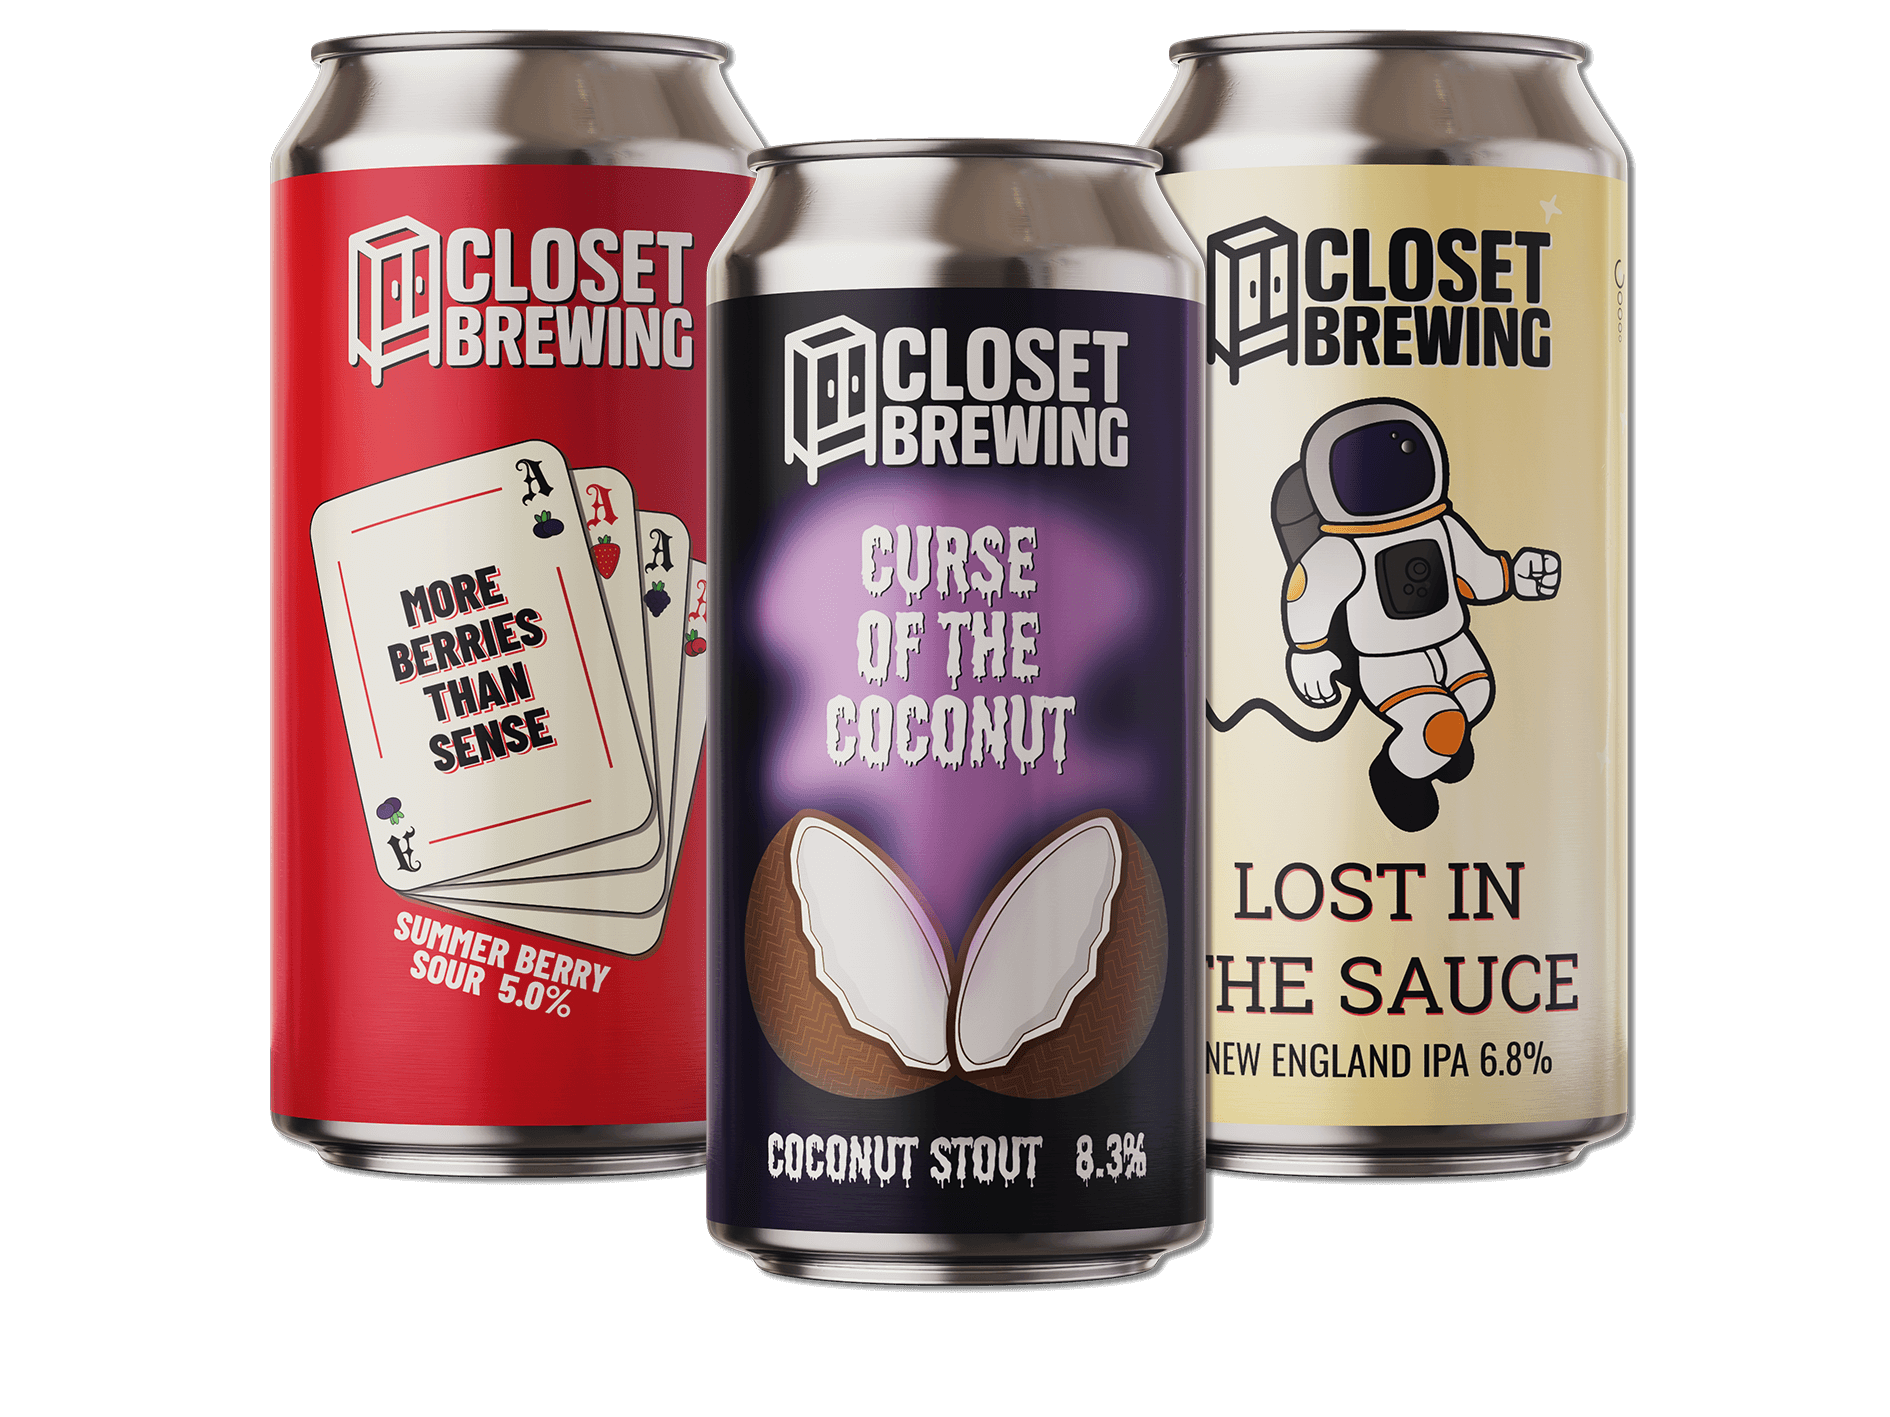 3 cans of Closet Brewing beer